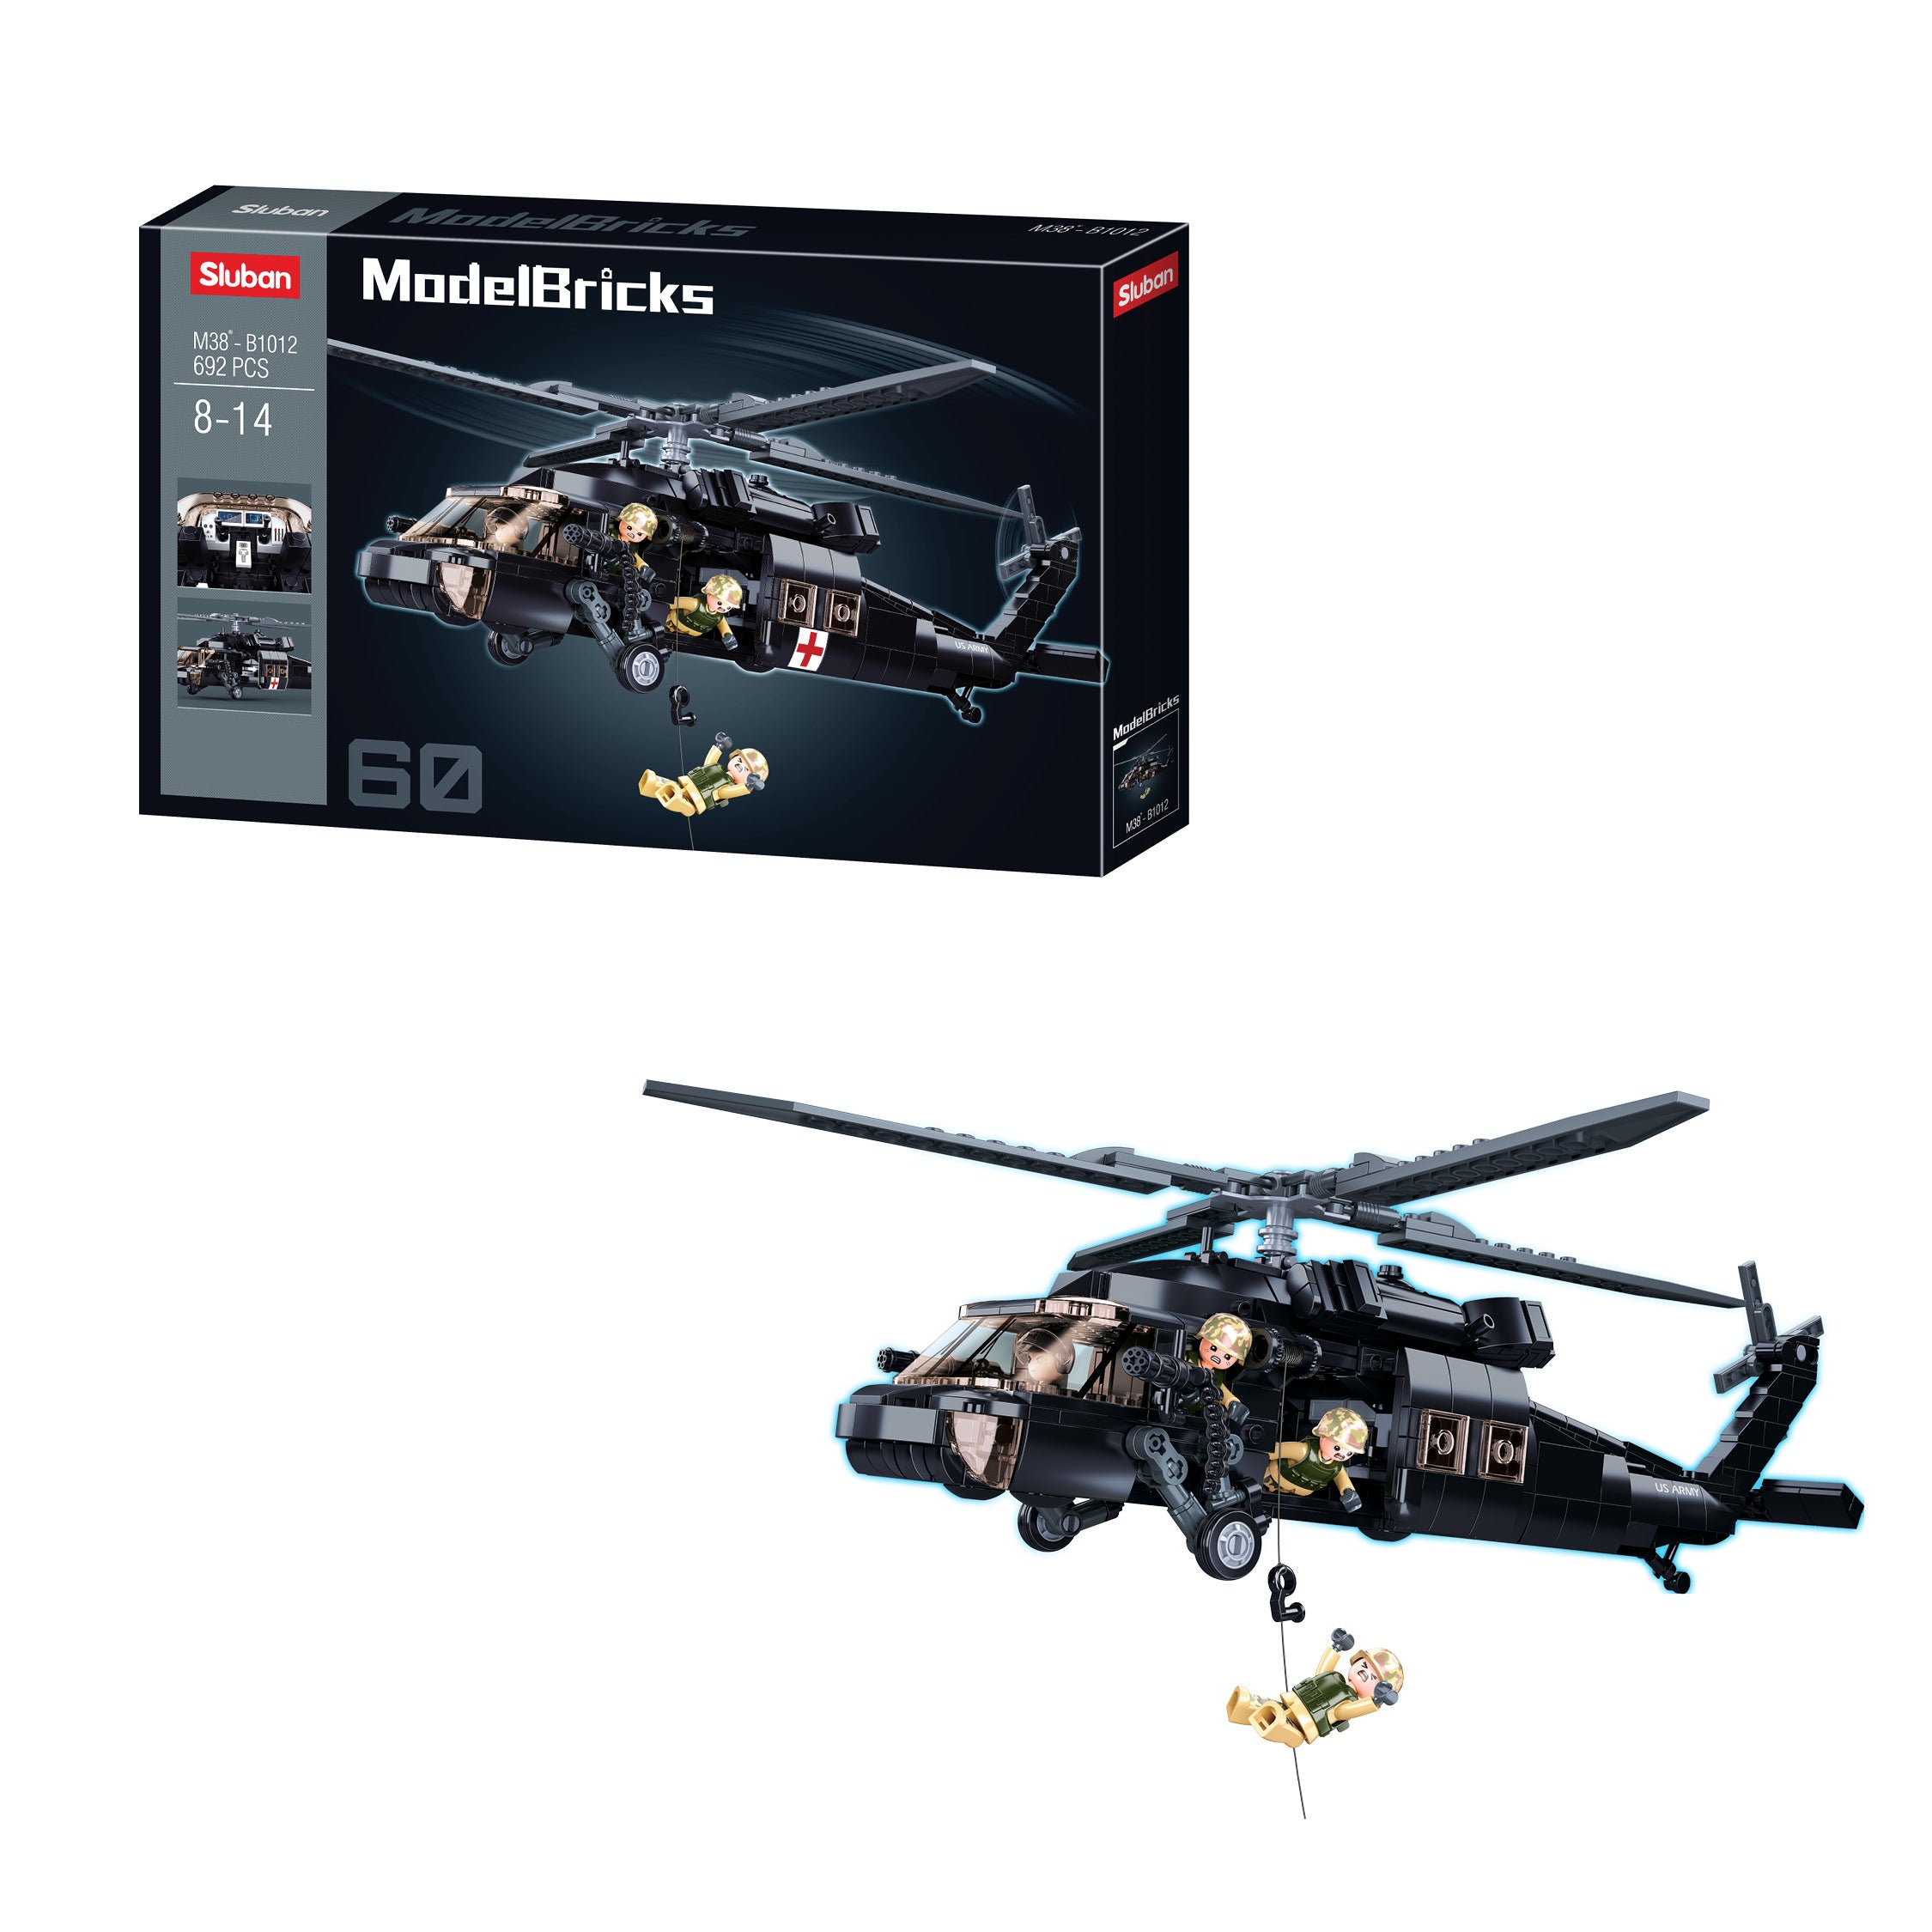 Sluban® Modelbricks Uh-60 Black Hawk (M38-B1012) (692 Pcs) Building Blocks Kit For Boys And Girls Aged 6 Years And Above Creative Construction Set Educational Stem Toy, Blocks Compatible With Other Leading Brands, Bis Certified.